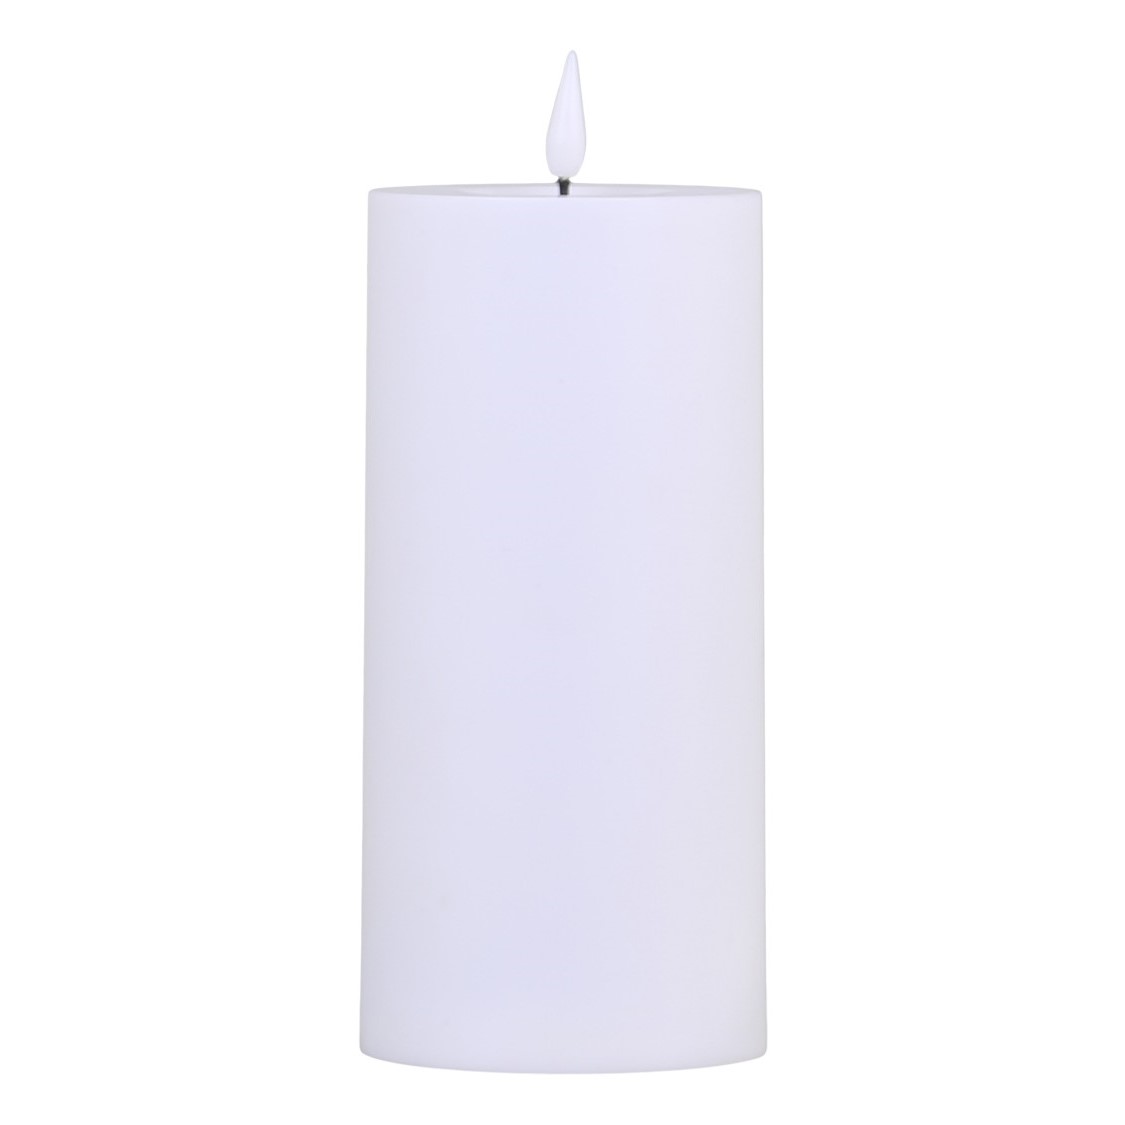 Pillar Candle LED f. outdoor incl. battery H35/D10 cm white